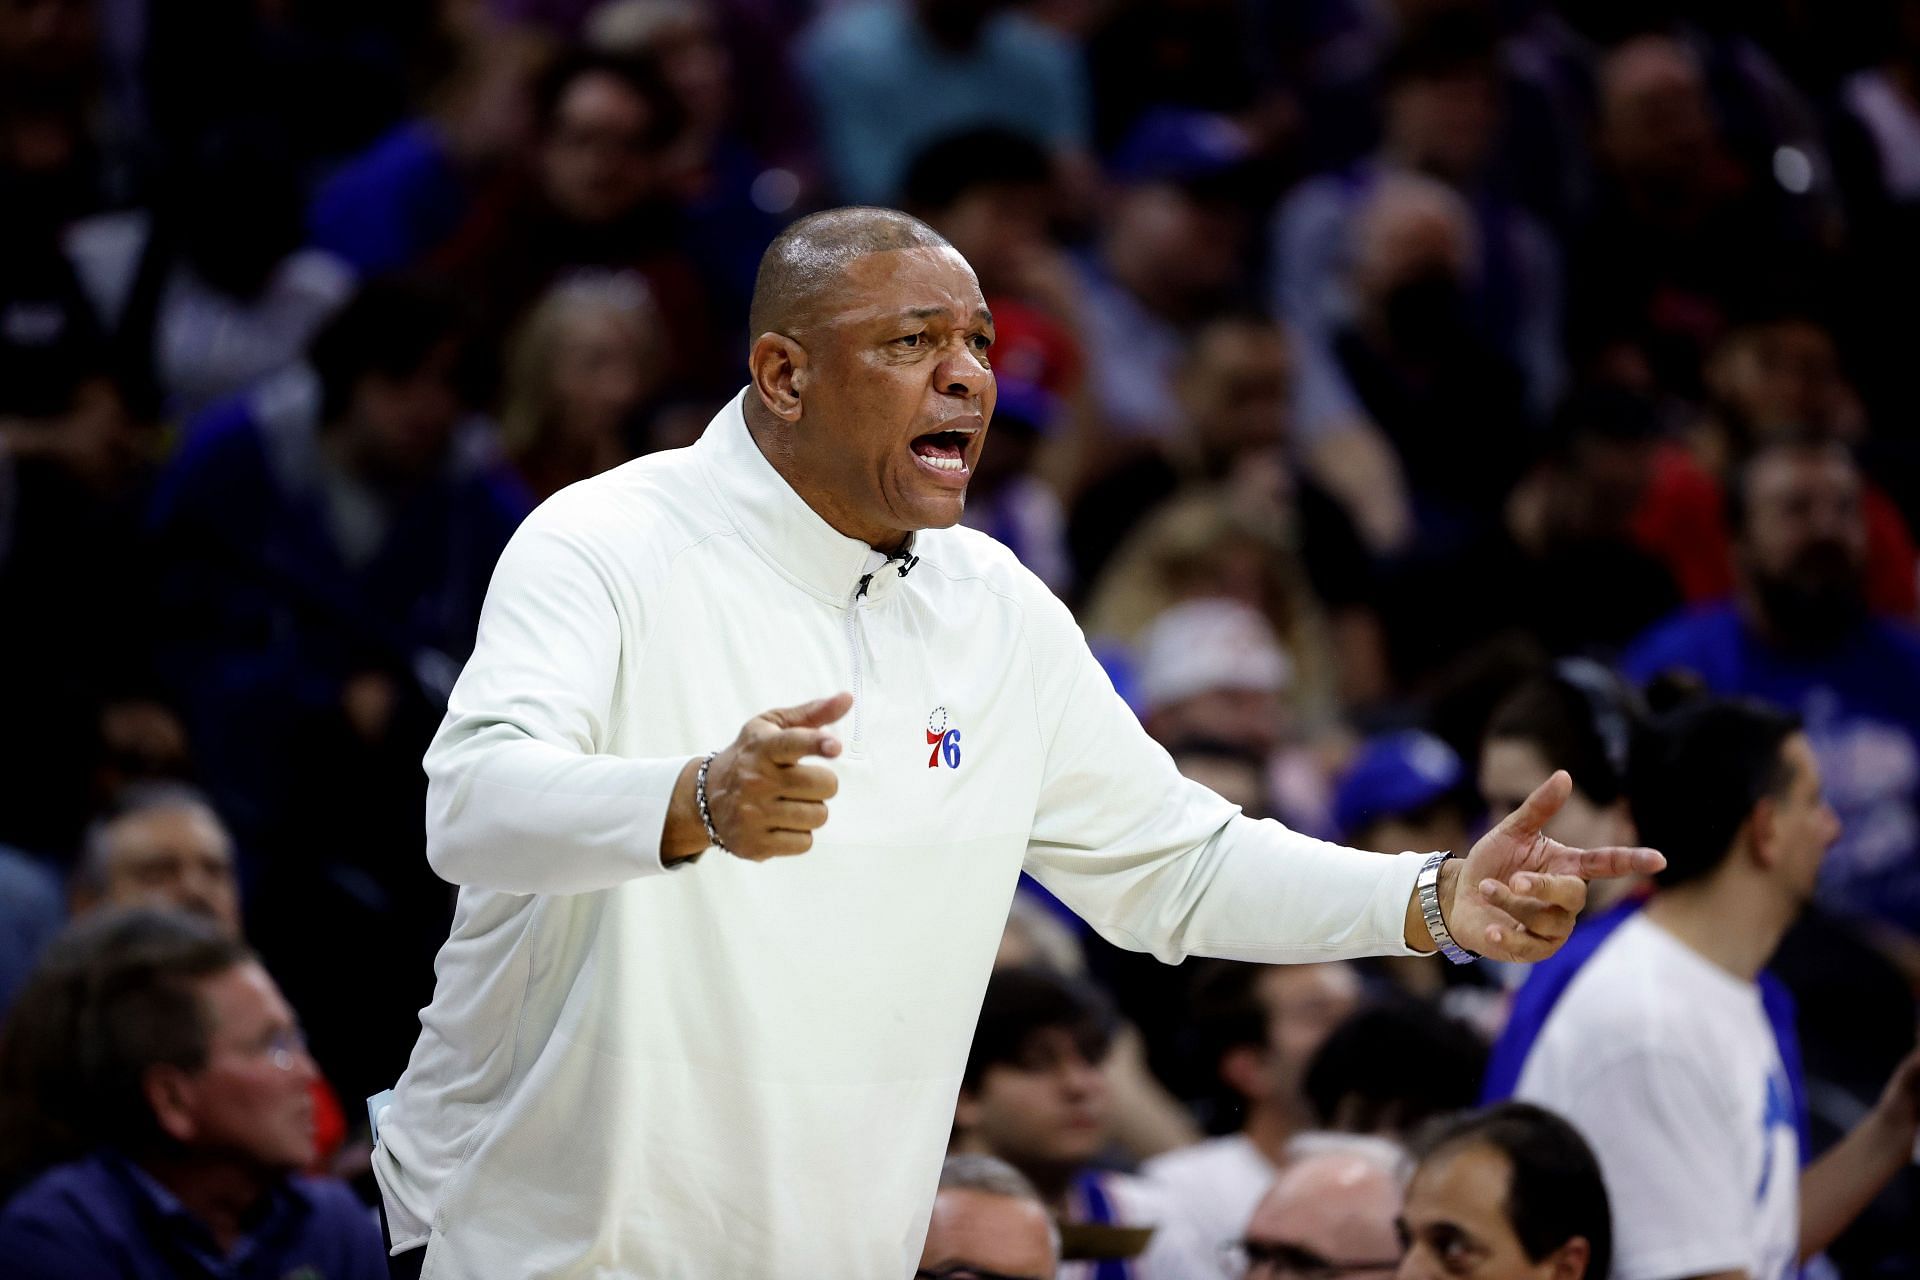 Philadelphia 76ers coach Doc Rivers has been listed as a possible candidate for the LA Lakers position.